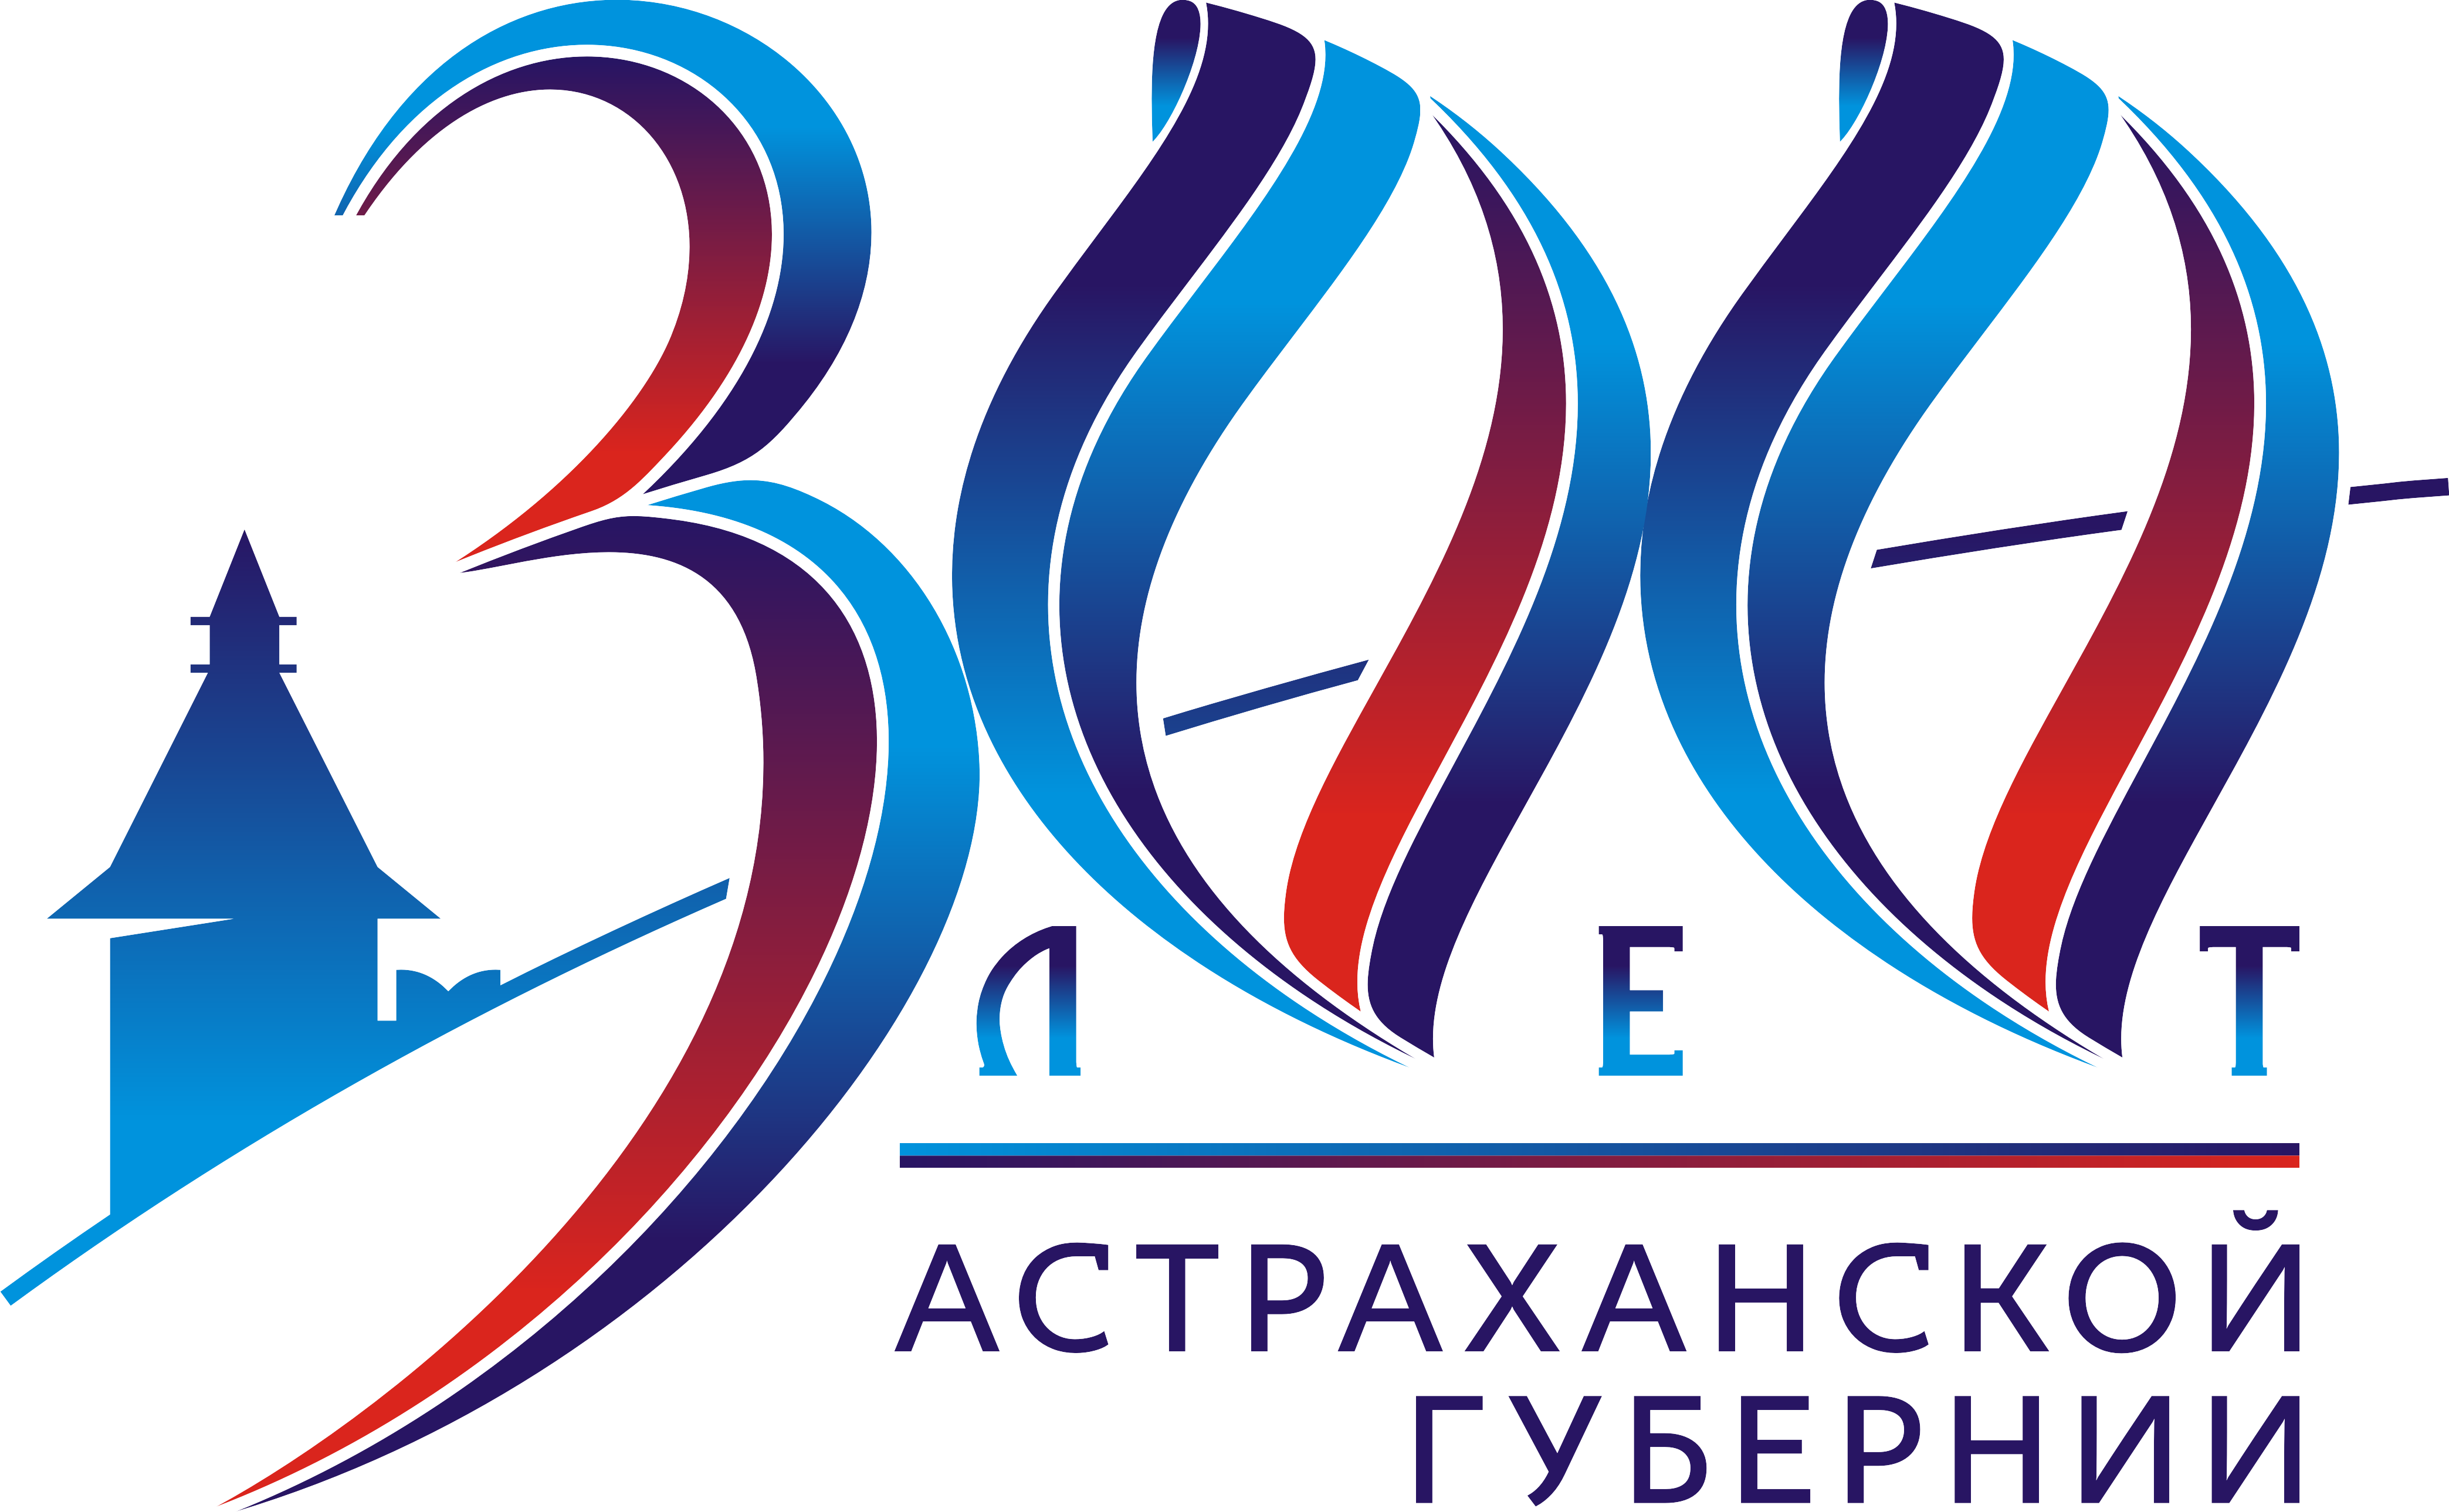 300th anniversary of the Astrakhan province